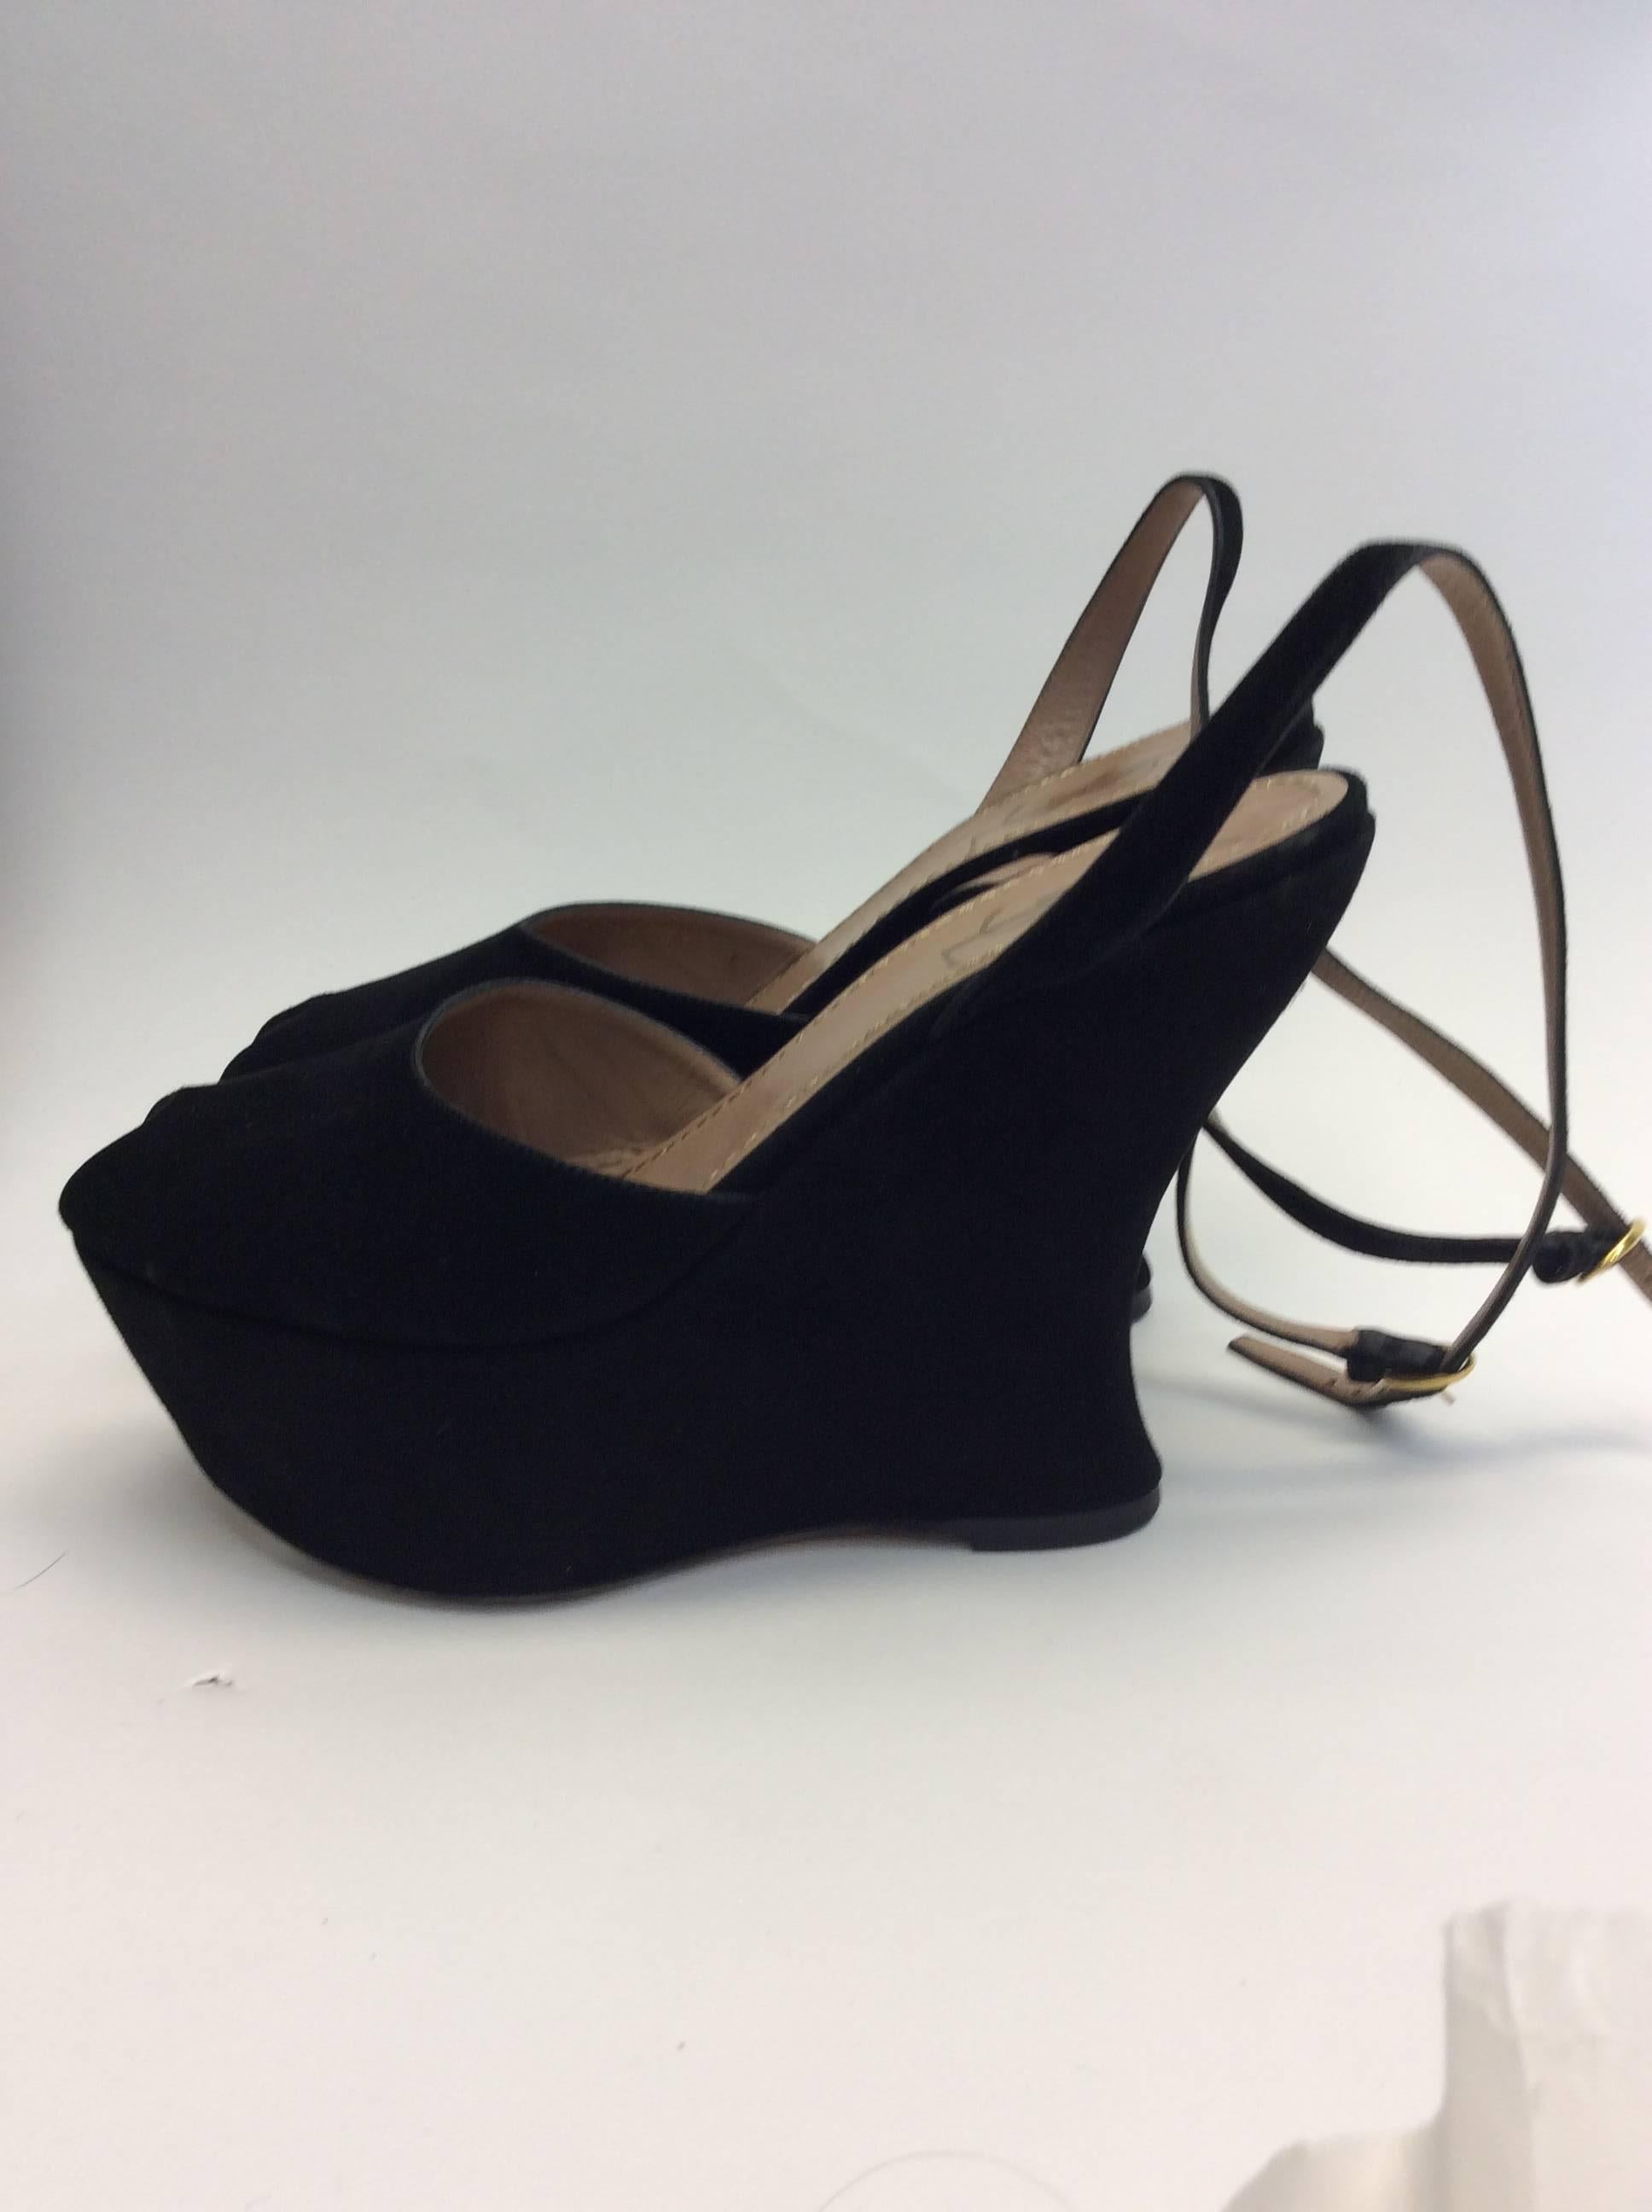 Yves Saint Laurent Suede Wedge In Excellent Condition For Sale In Narberth, PA